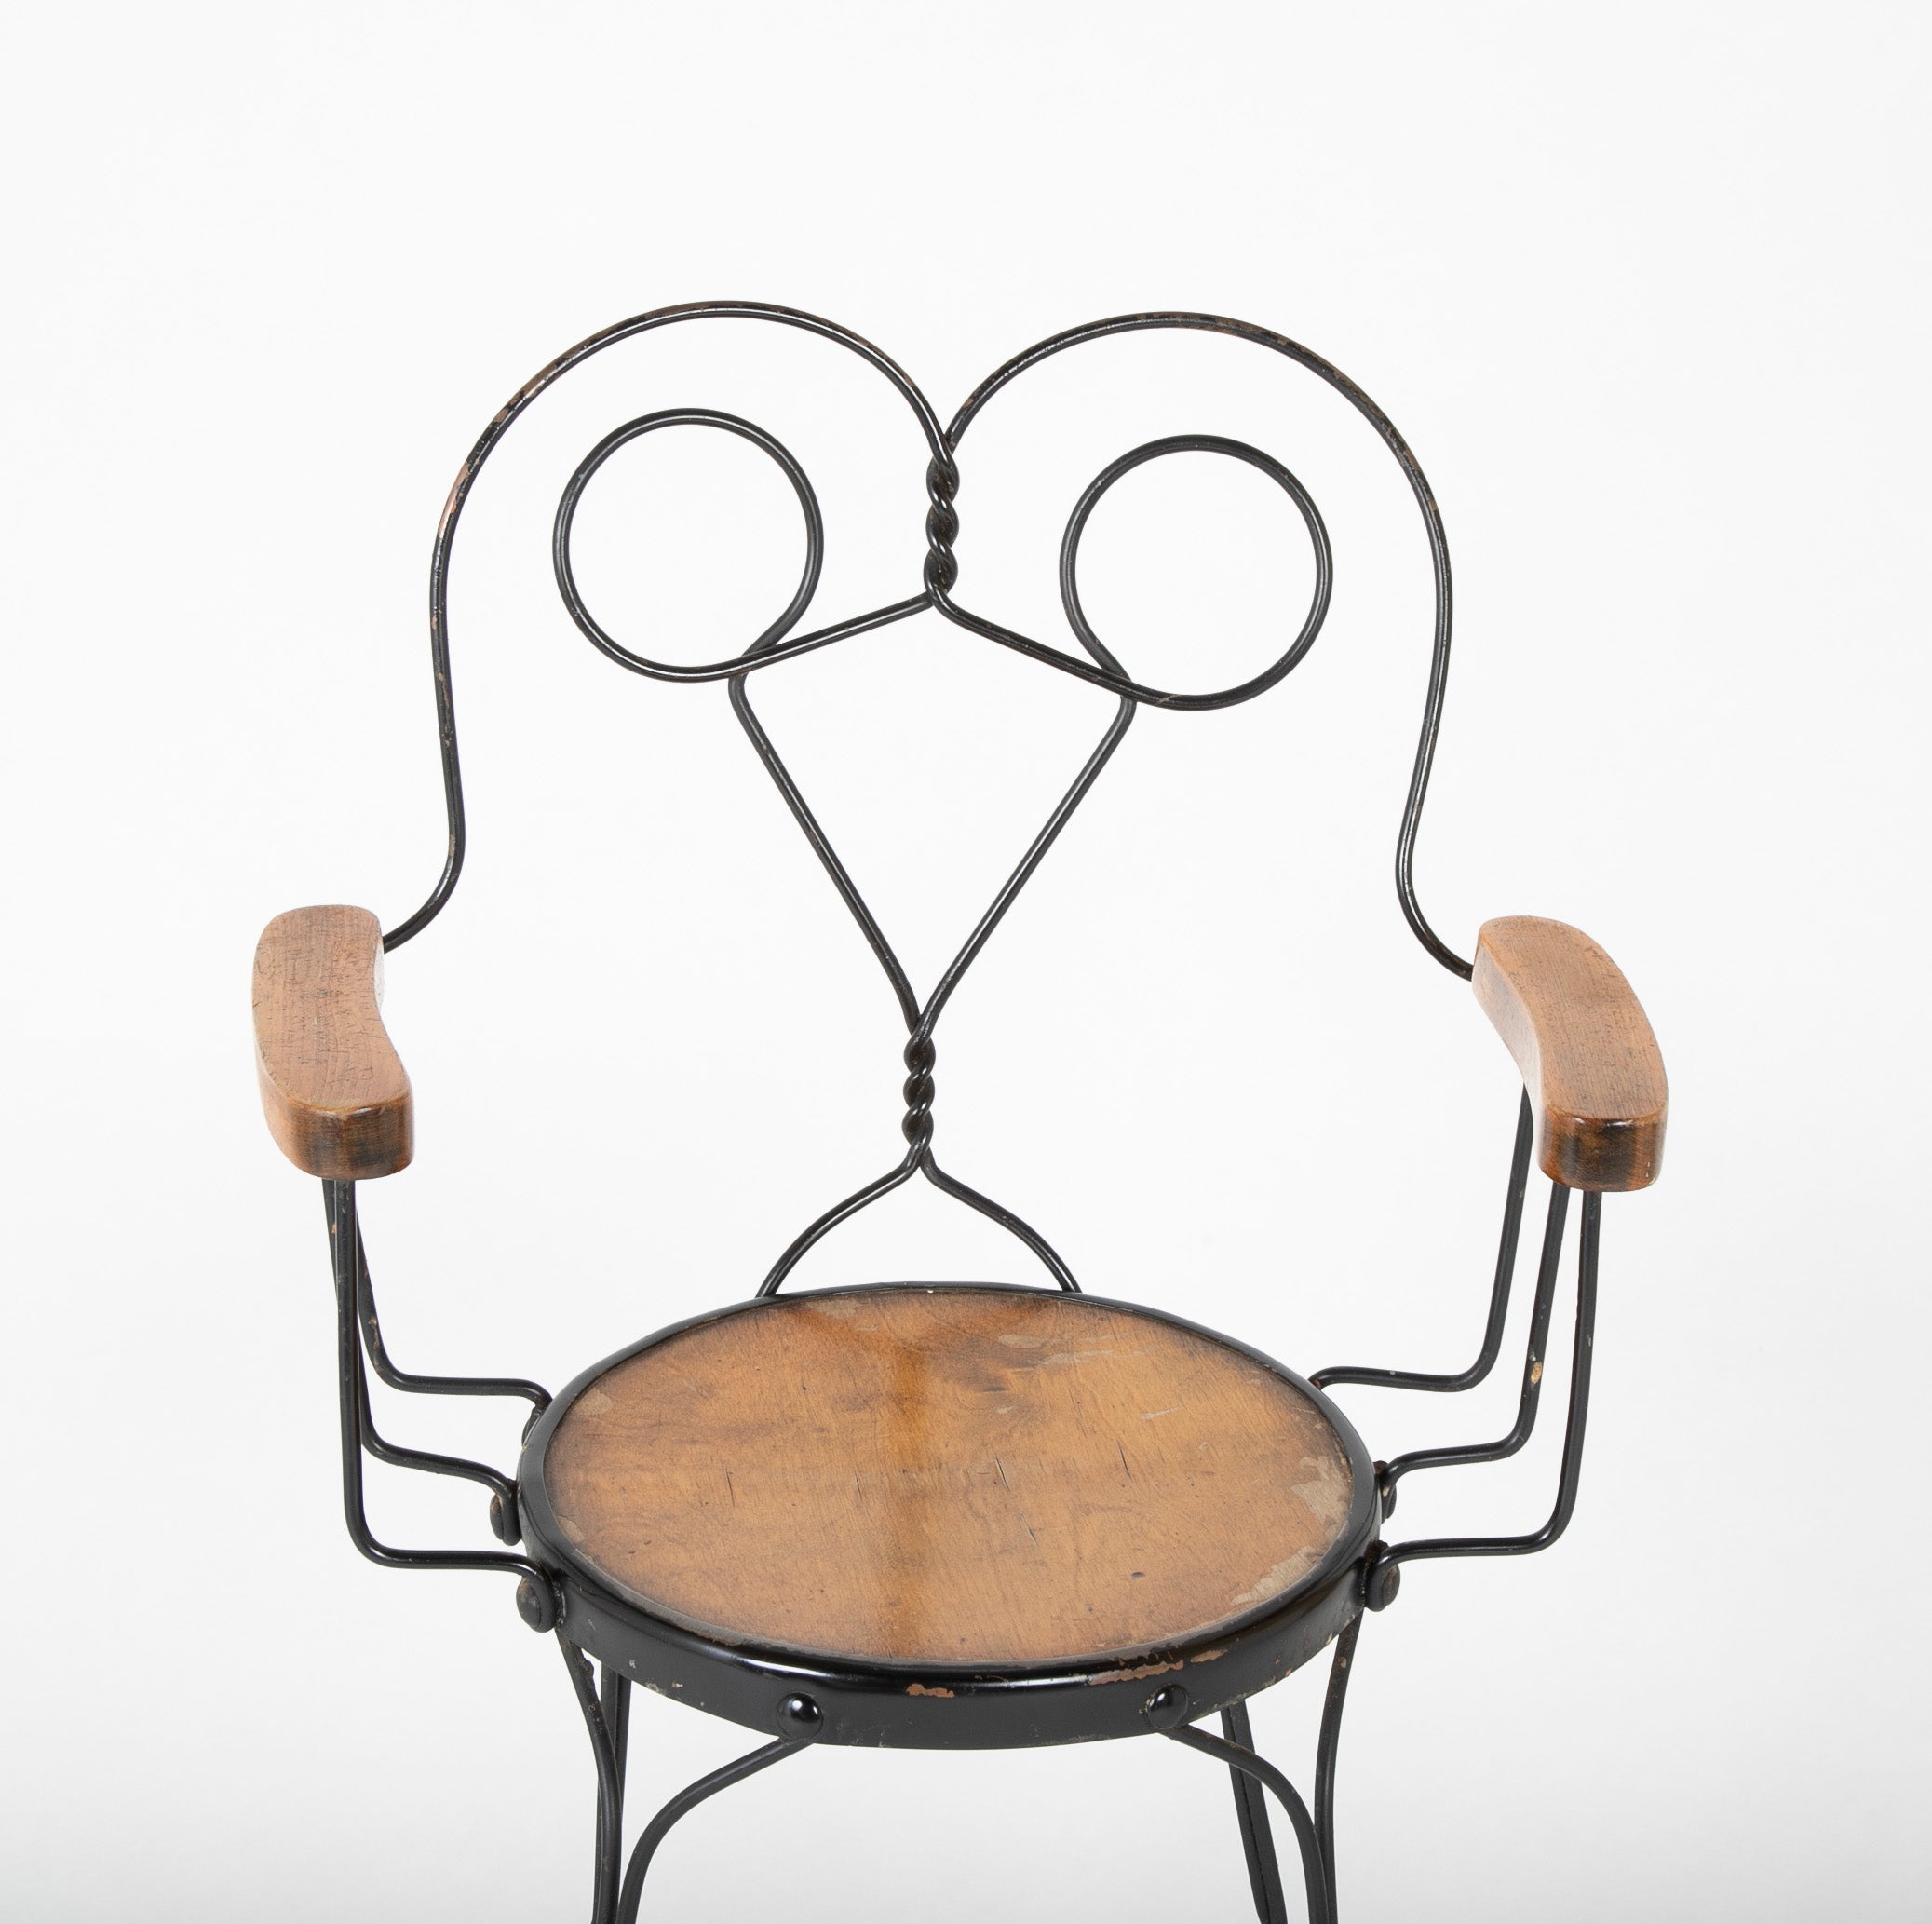 Pair of Late 19th - Early 20th Century Wire Chairs